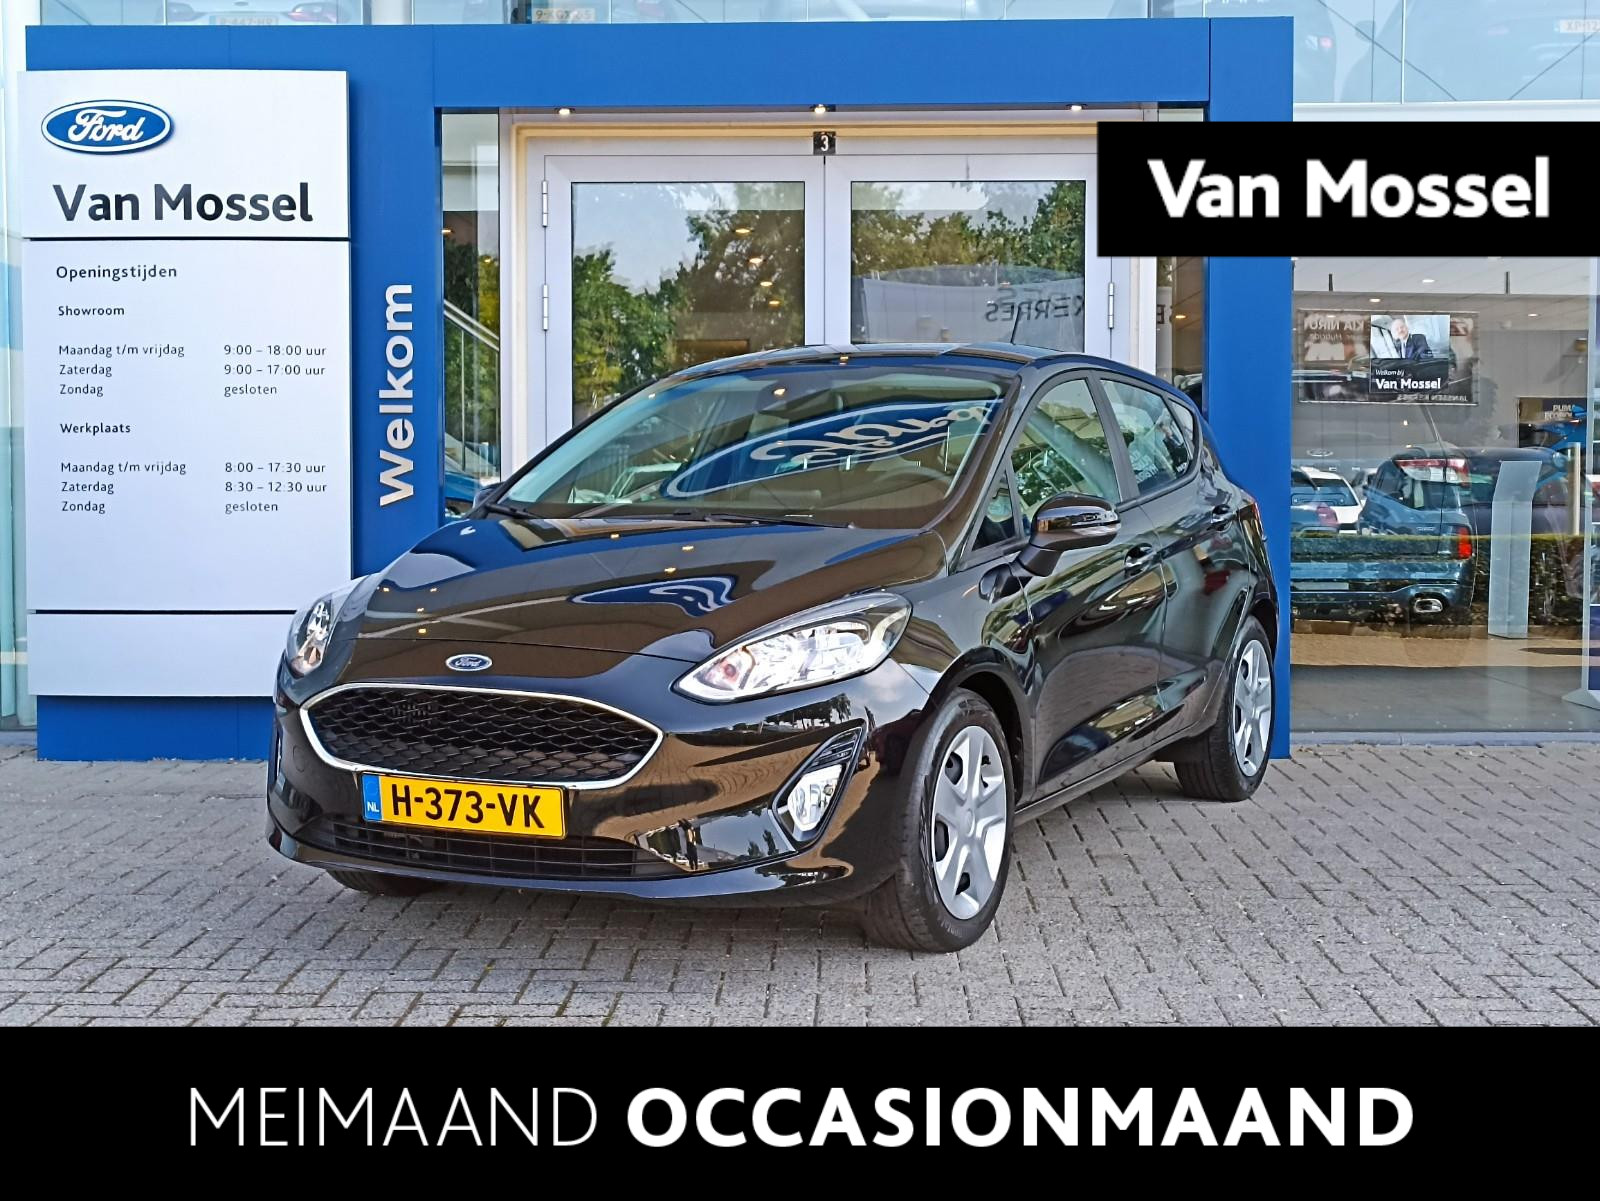 Ford Fiesta 1.0 EcoBoost Connected PDC Achter | DAB | Airco | Cruise Control |